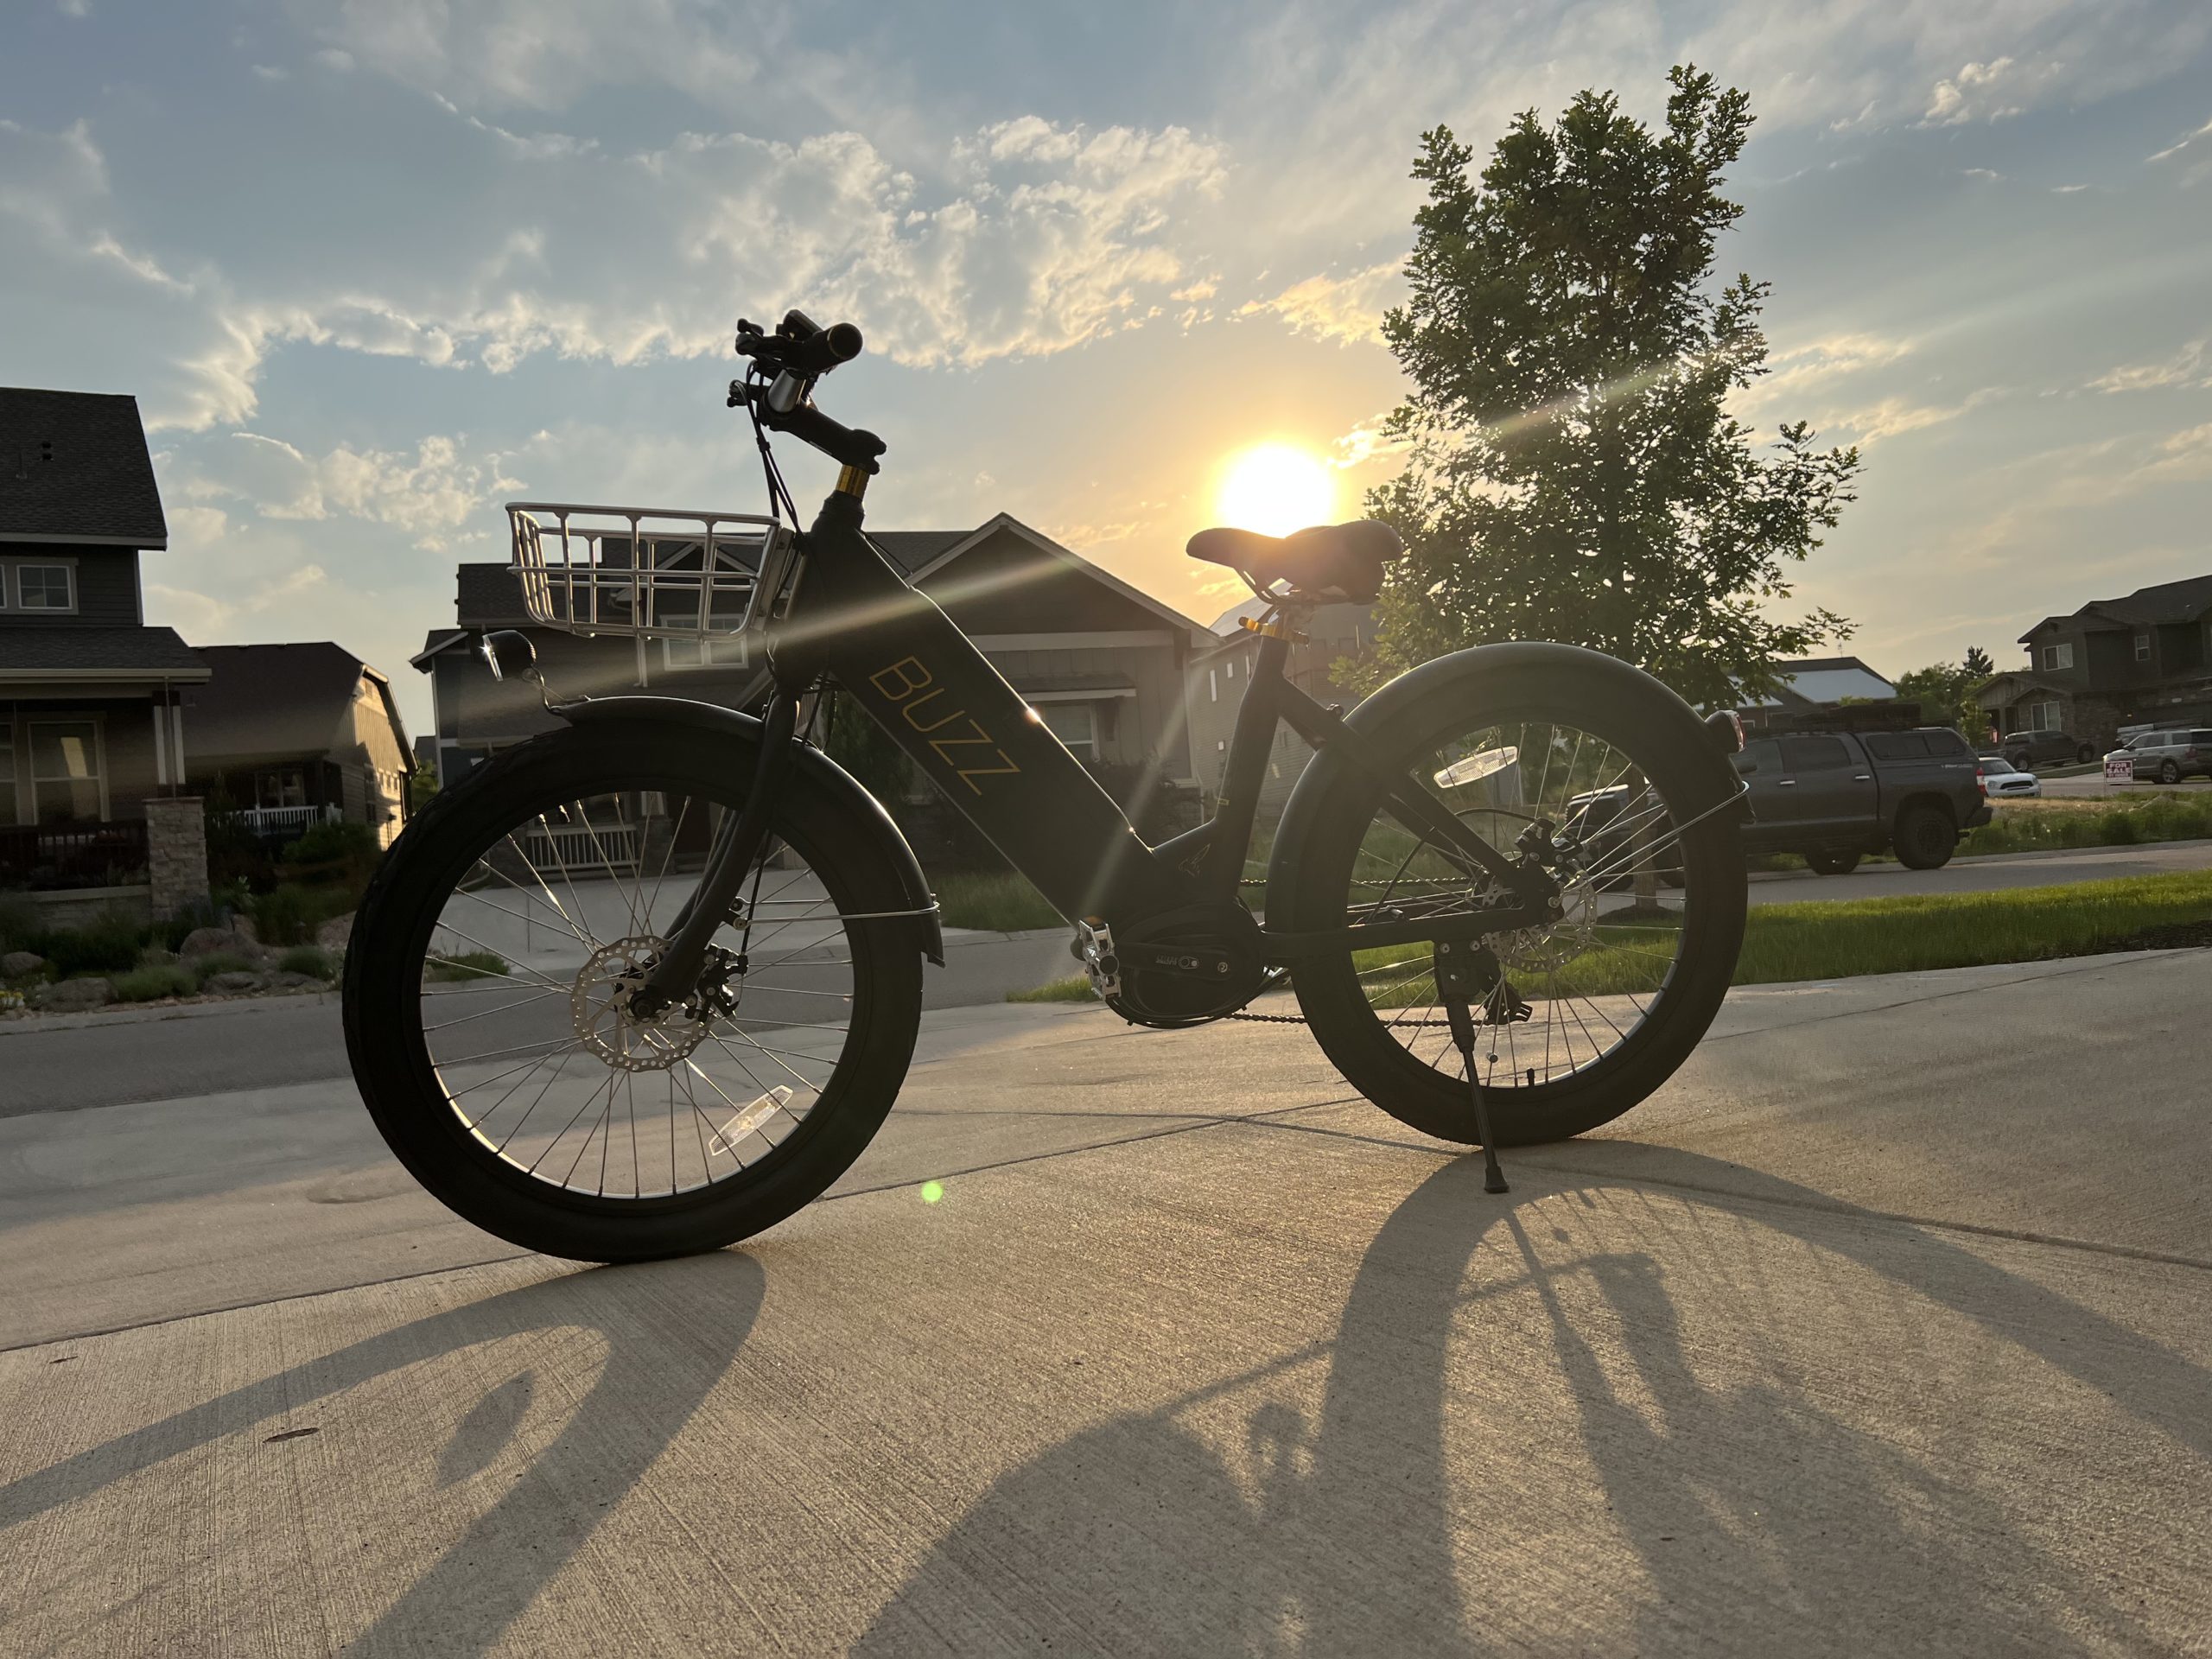 Buzz eBike Cerana Review: the only eBike where I've felt 100% in control 2